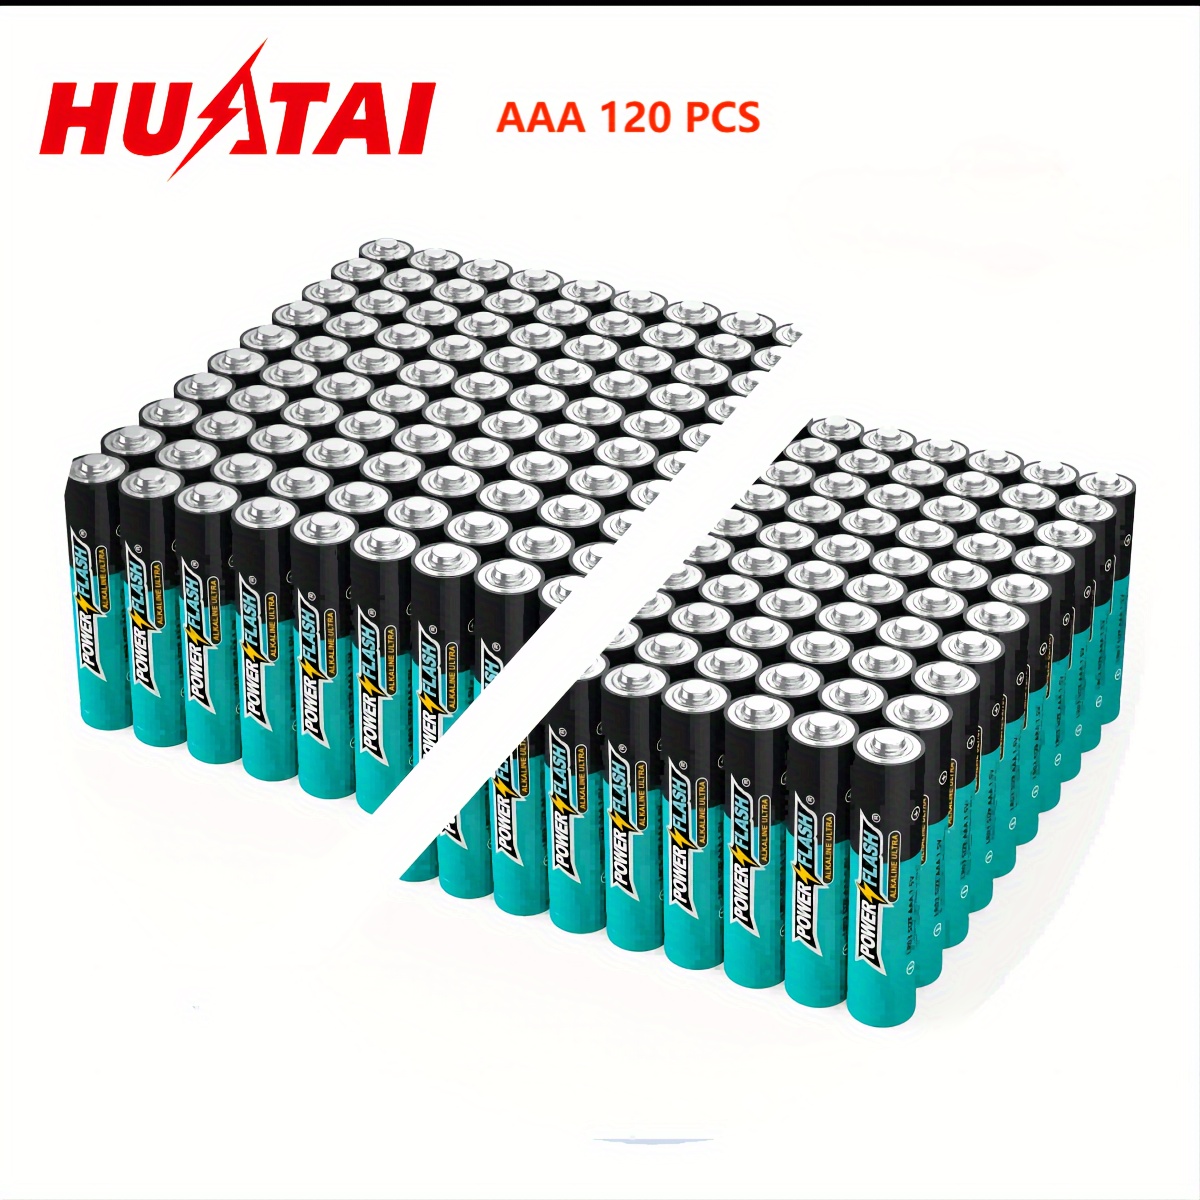 

Huatai Powerflash Aaa 120 Pcs High-performance Alkaline Batteries Value Pack, Lr03, Triple A Batteries For Home, Various Household Device, Romotes